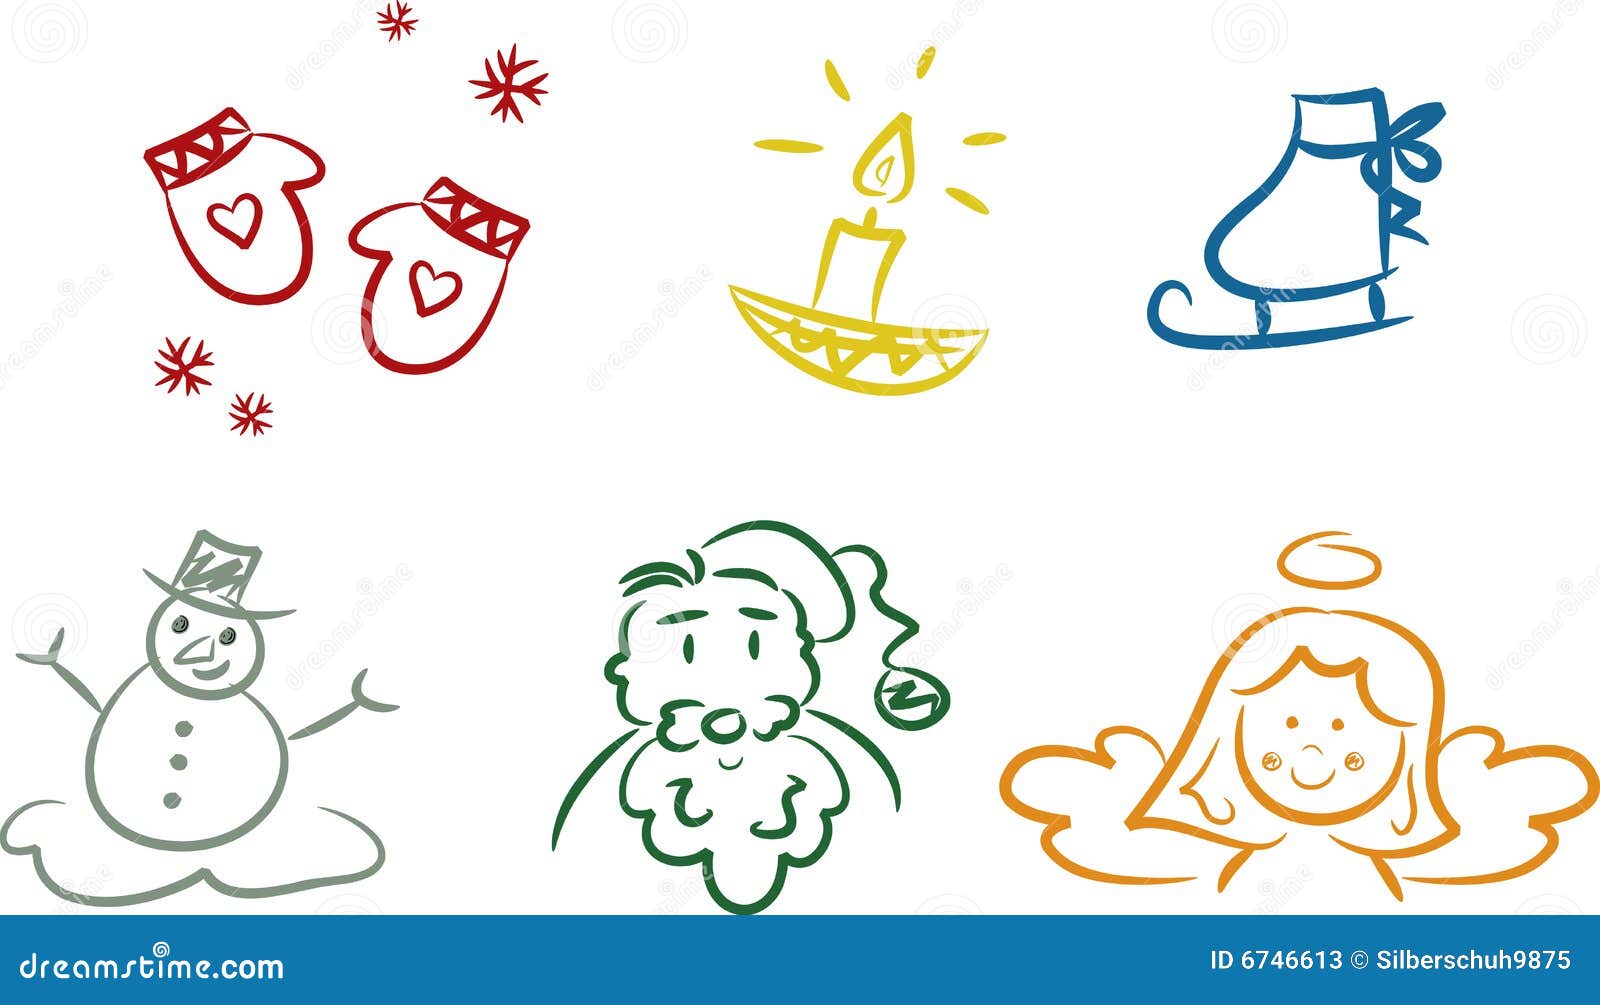 Colorful Christmas Doodles Stock Photos - Image: 6746613